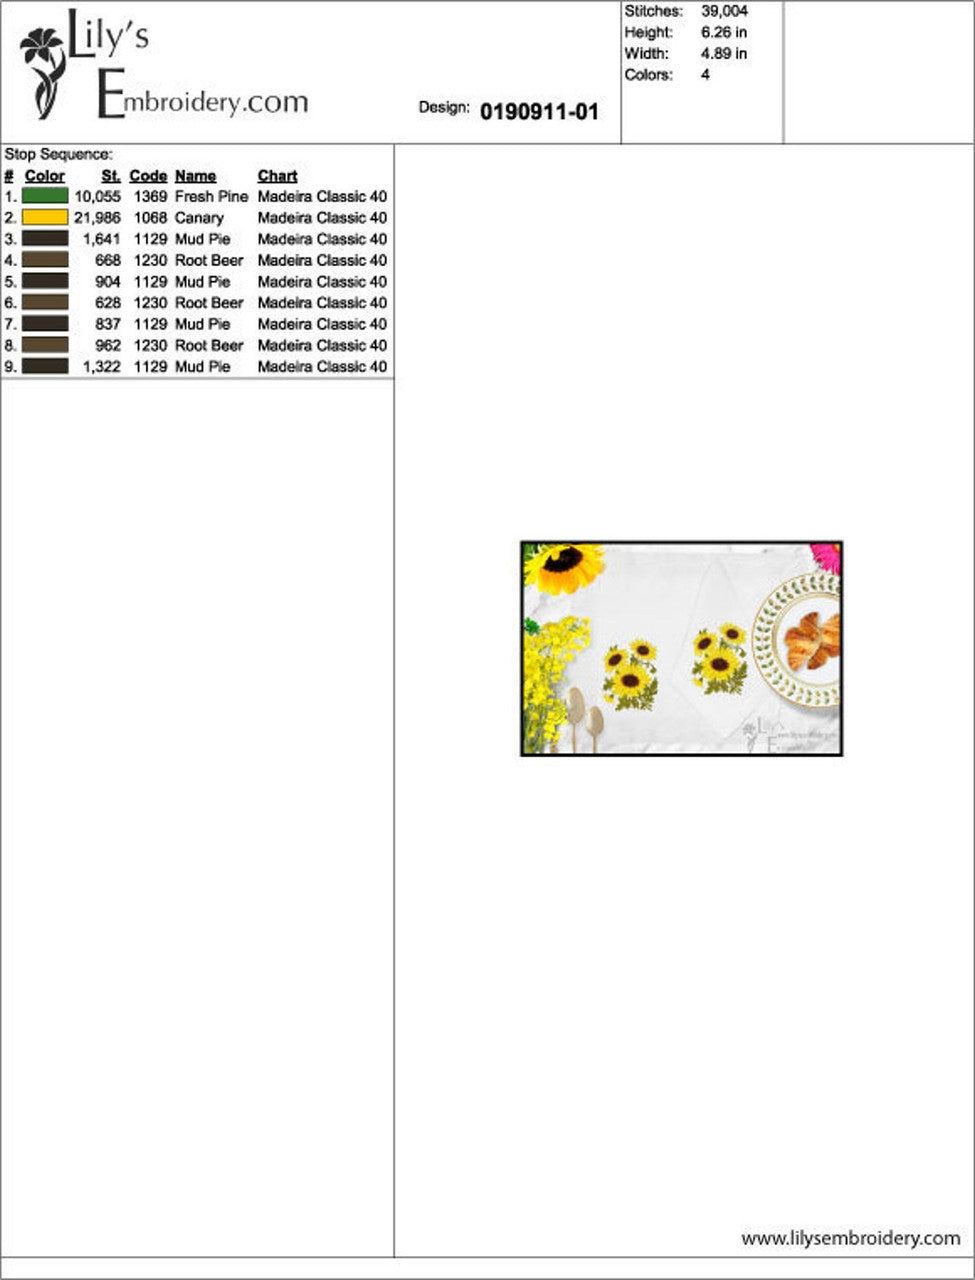 Sunflowers Machine Embroidery Design - 3 Sizes